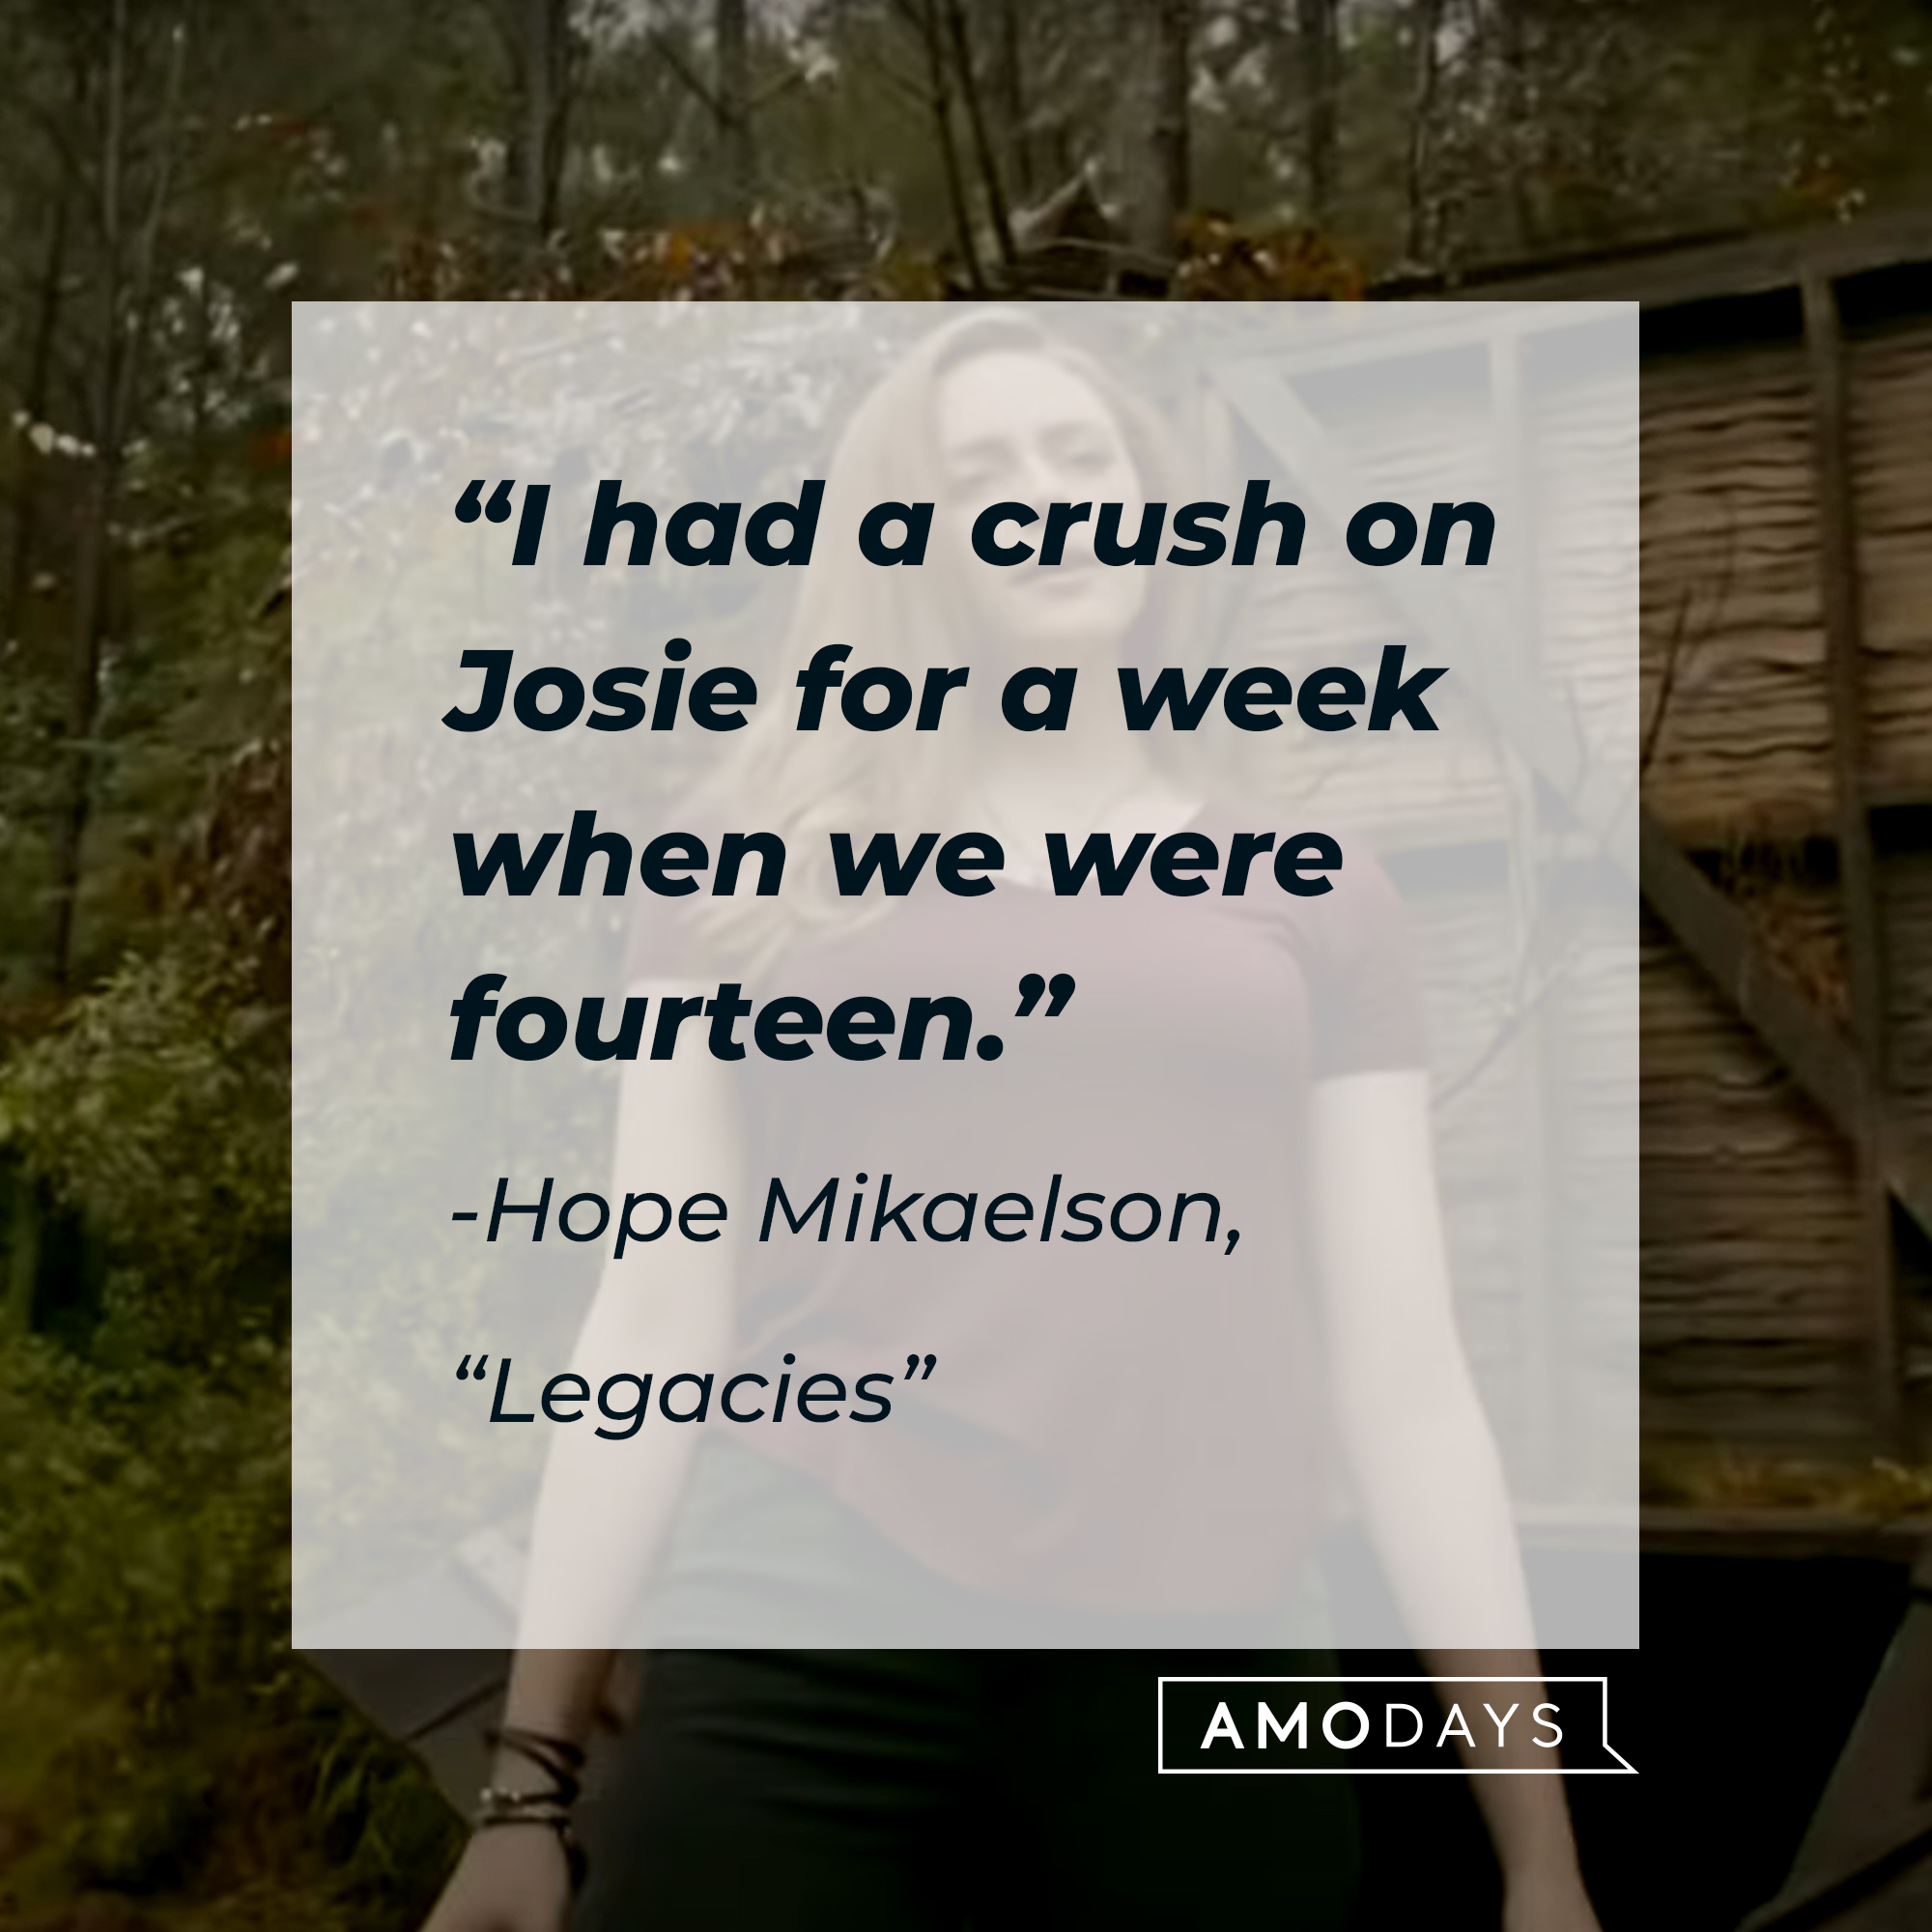 Hope Mikaelson with her quote: “I had a crush on Josie for a week when we were fourteen.” | Source: Facebook.com/CWLegacies